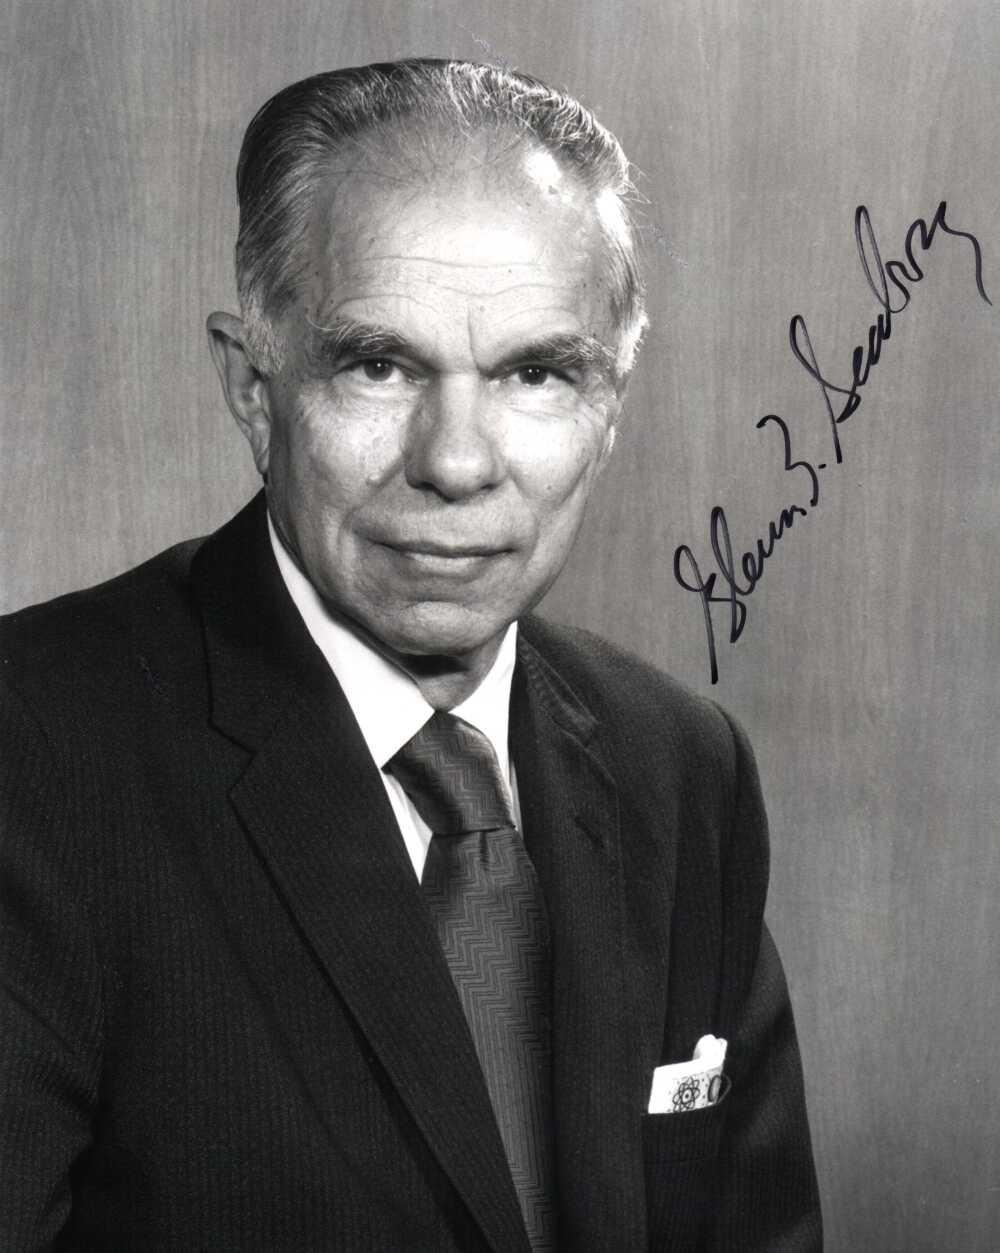 Glenn Seaborg: Status in 1969 LMFBR success dependent on simultaneous fulfillment of assumptions: 1) Electric demand doubles every decade 2) Nuclear will capture more electricity generation market